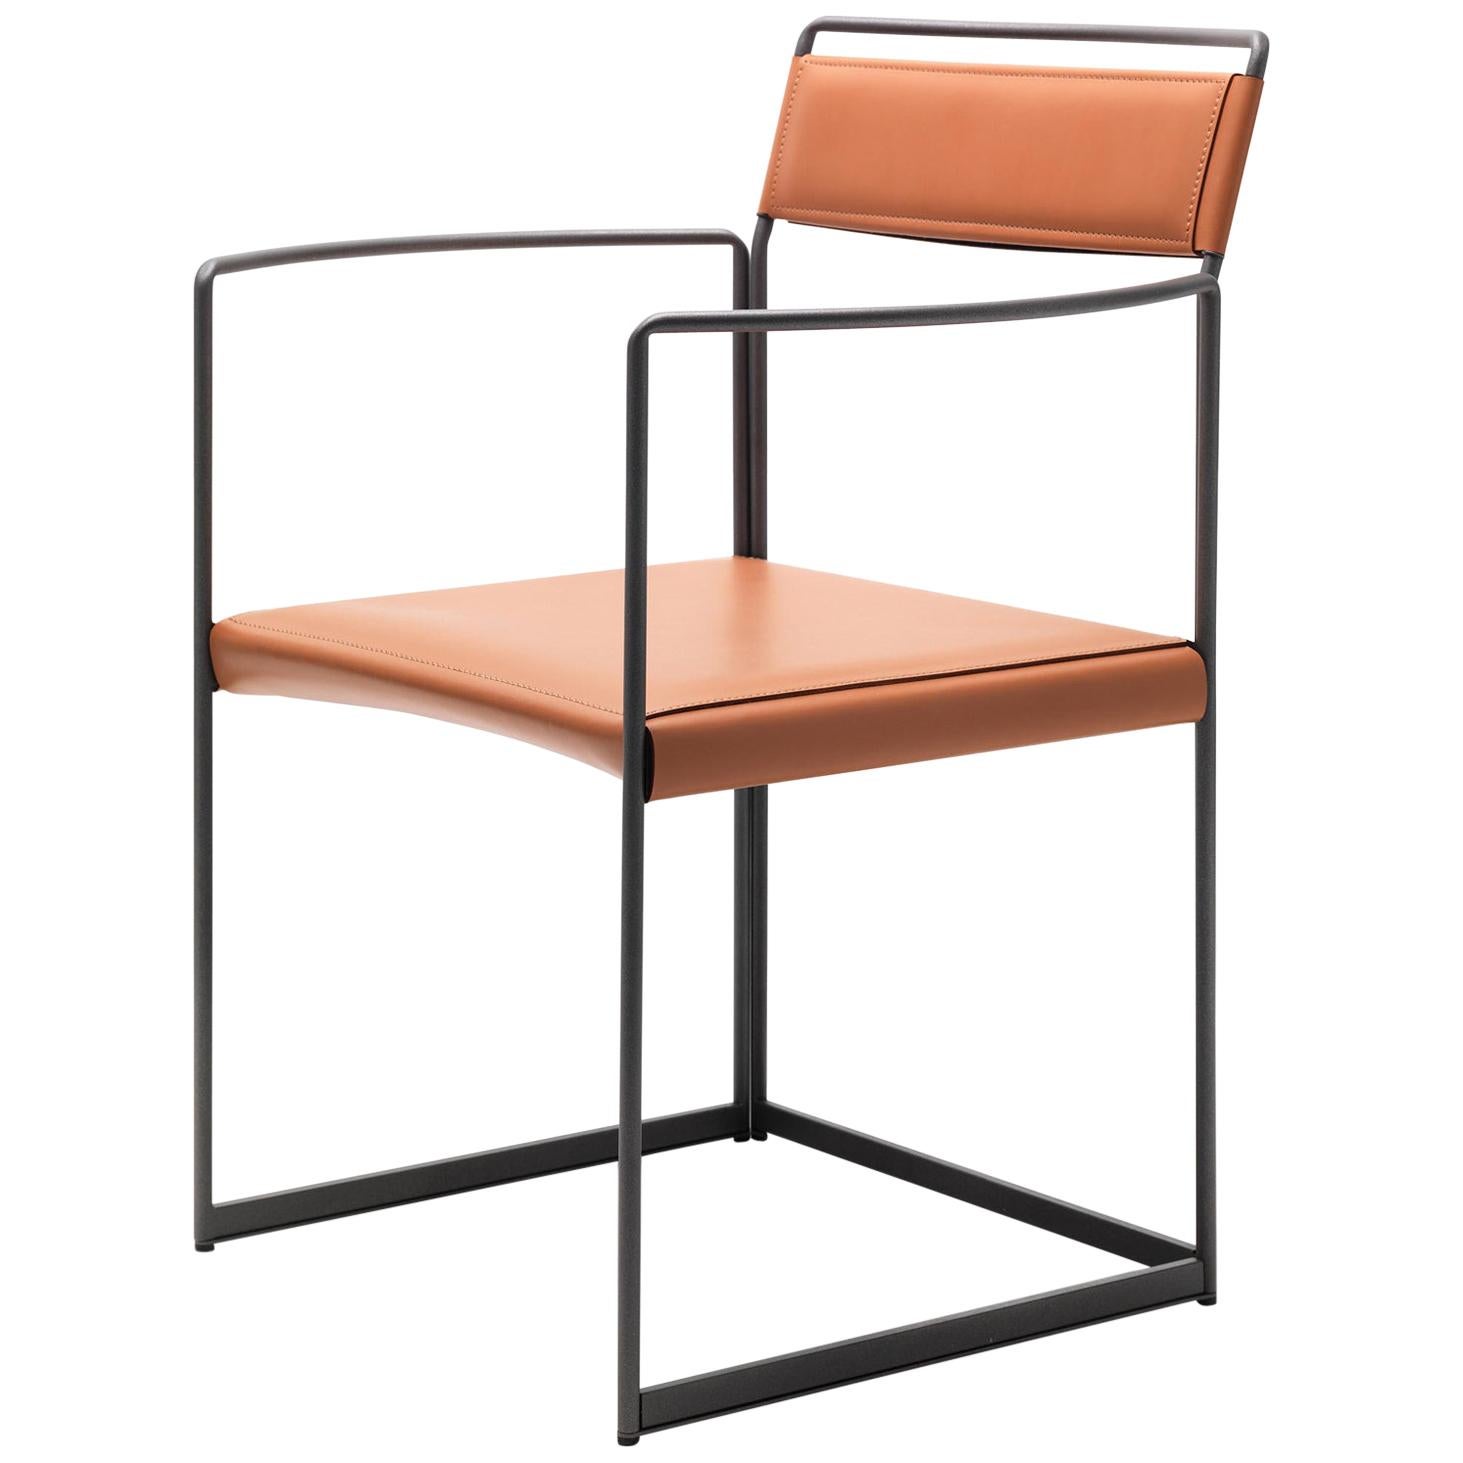 21st Century Modern Chair With Painted Steel Structure And Hide Leather Seat